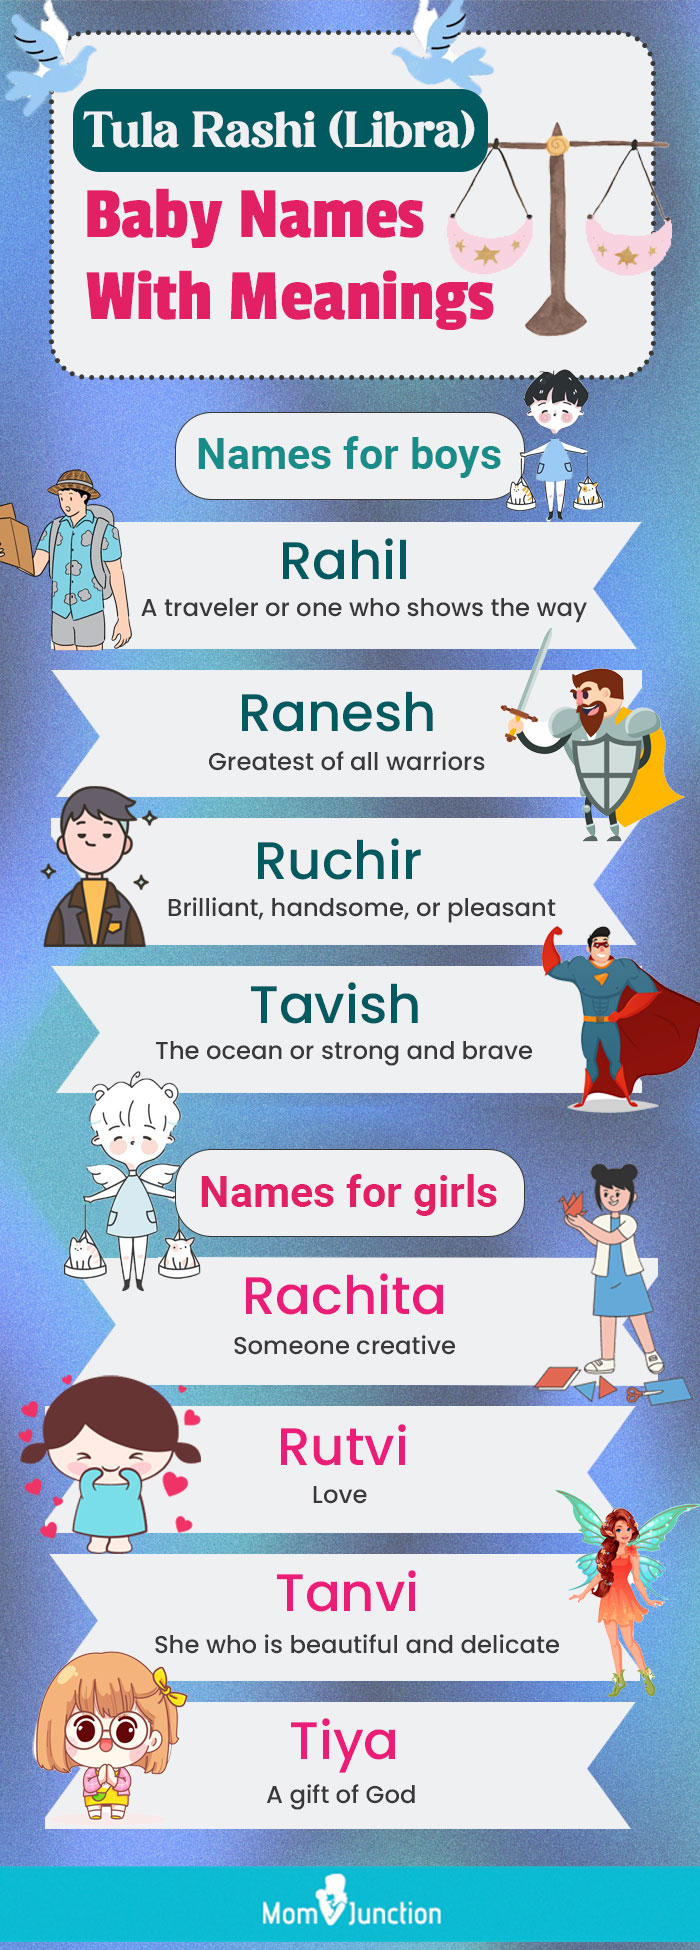 tula rashi (libra) baby names with meanings (infographic)